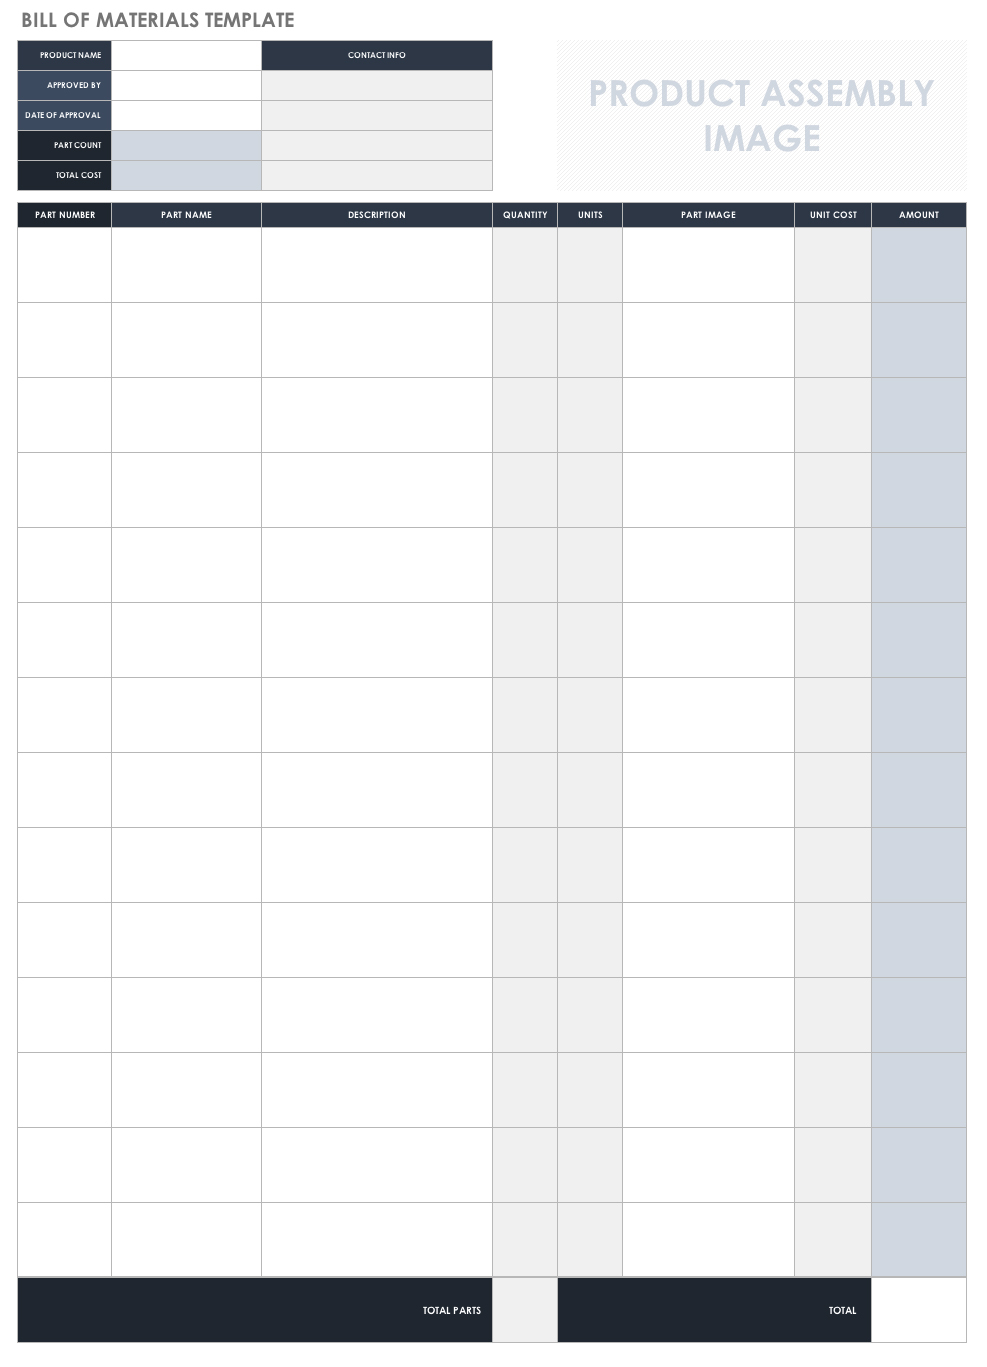 Sample Of Bill Of Materials Template Excel In Bill Of Materials Template Excel Download